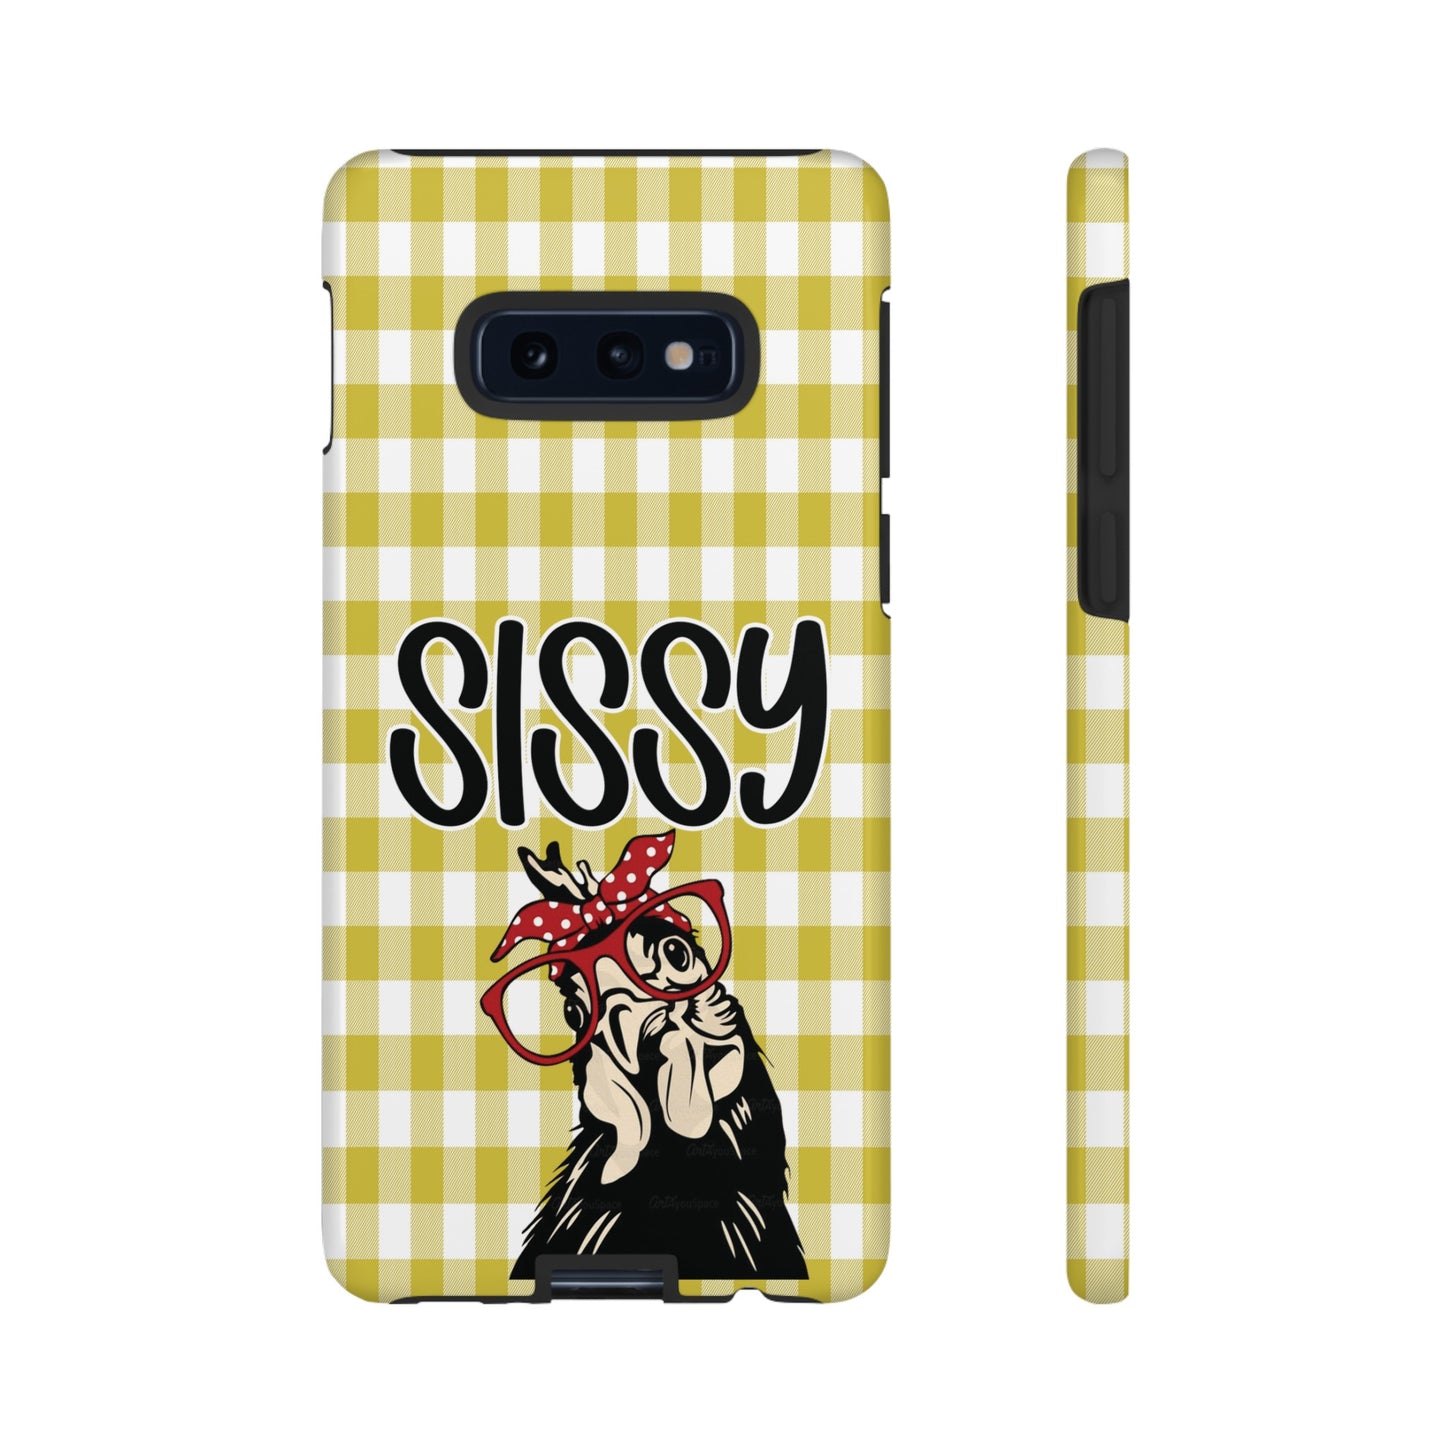 Livestock Show Poultry Phone Cases - Show Chickens - Android Poultry Phone Cases